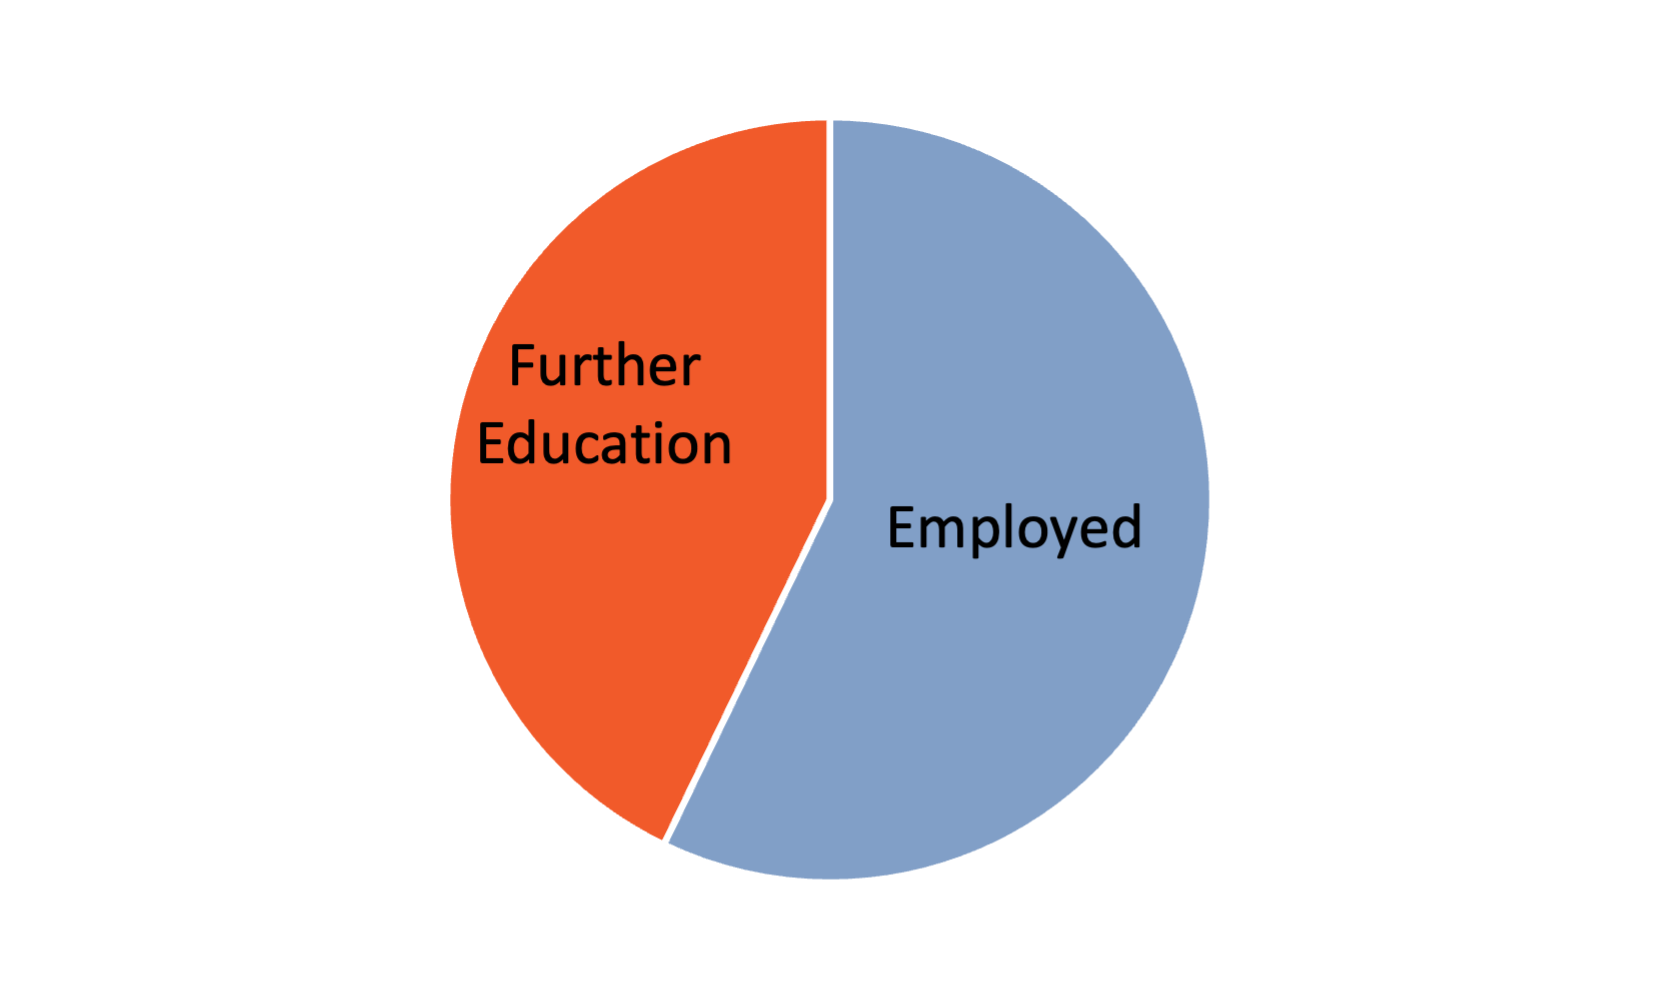 Pie chart with labels for each section of where students go after graduation.